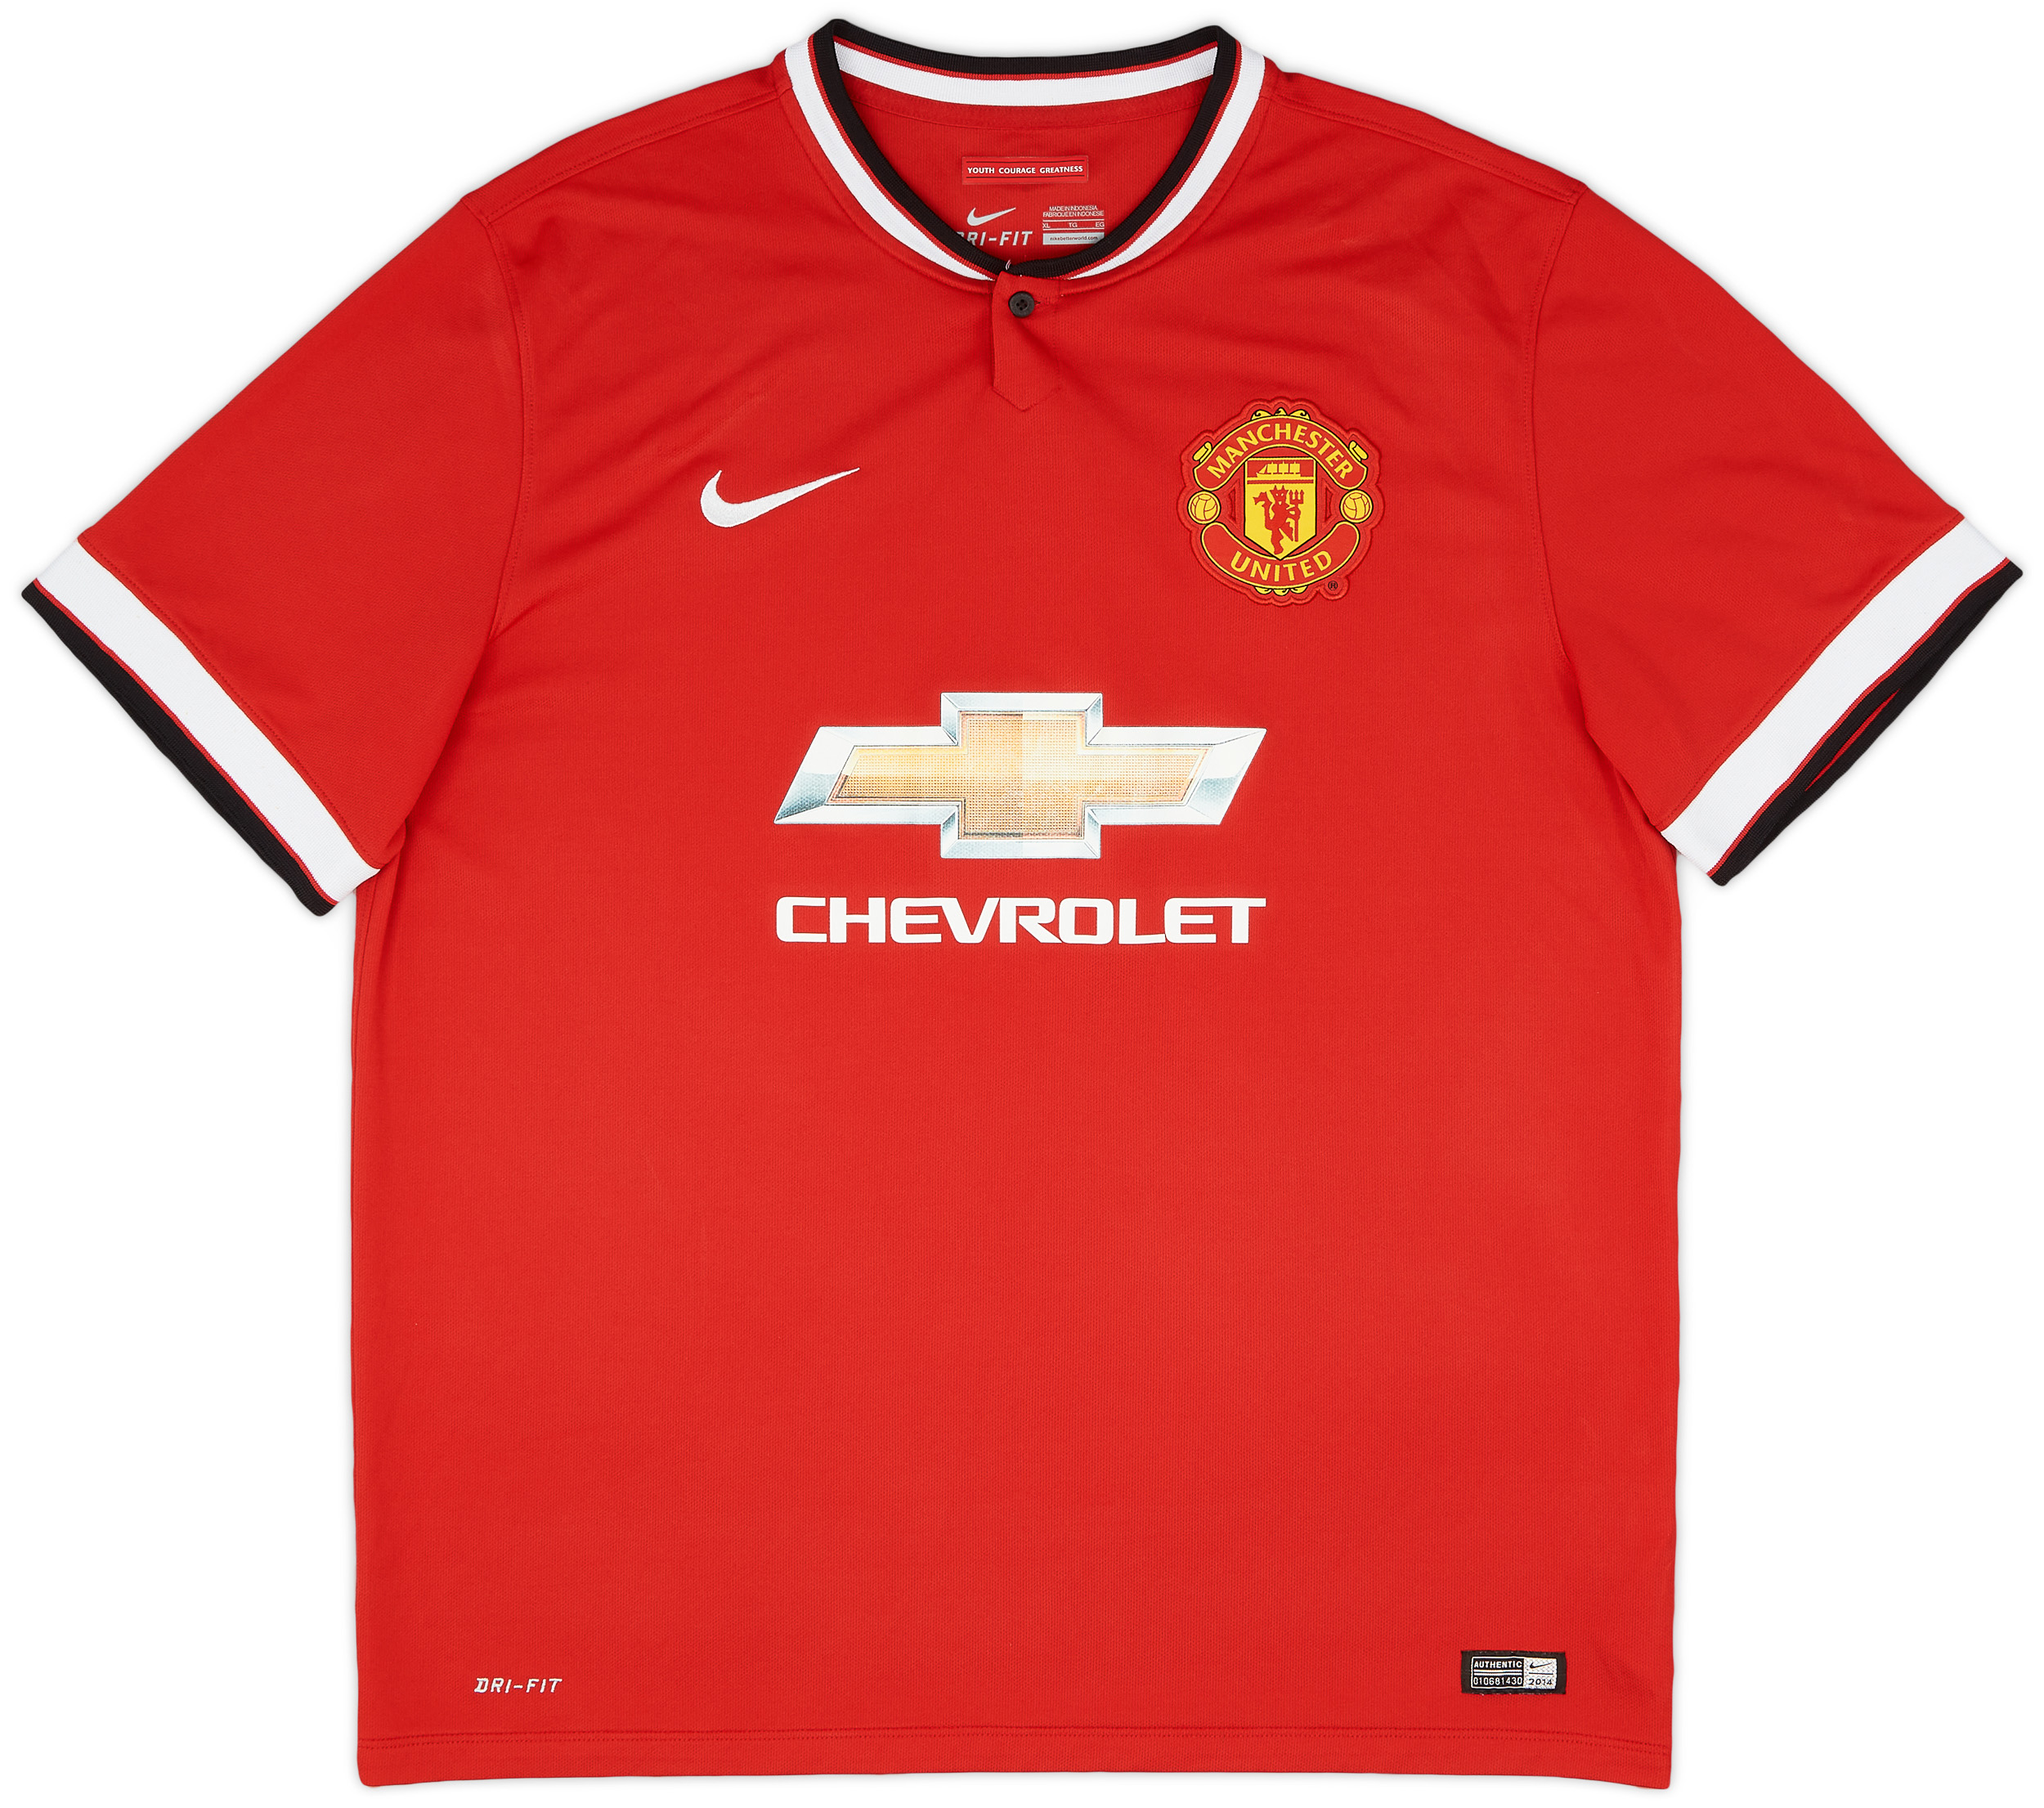 2014-15 Manchester United Home Shirt - 6/10 - ()